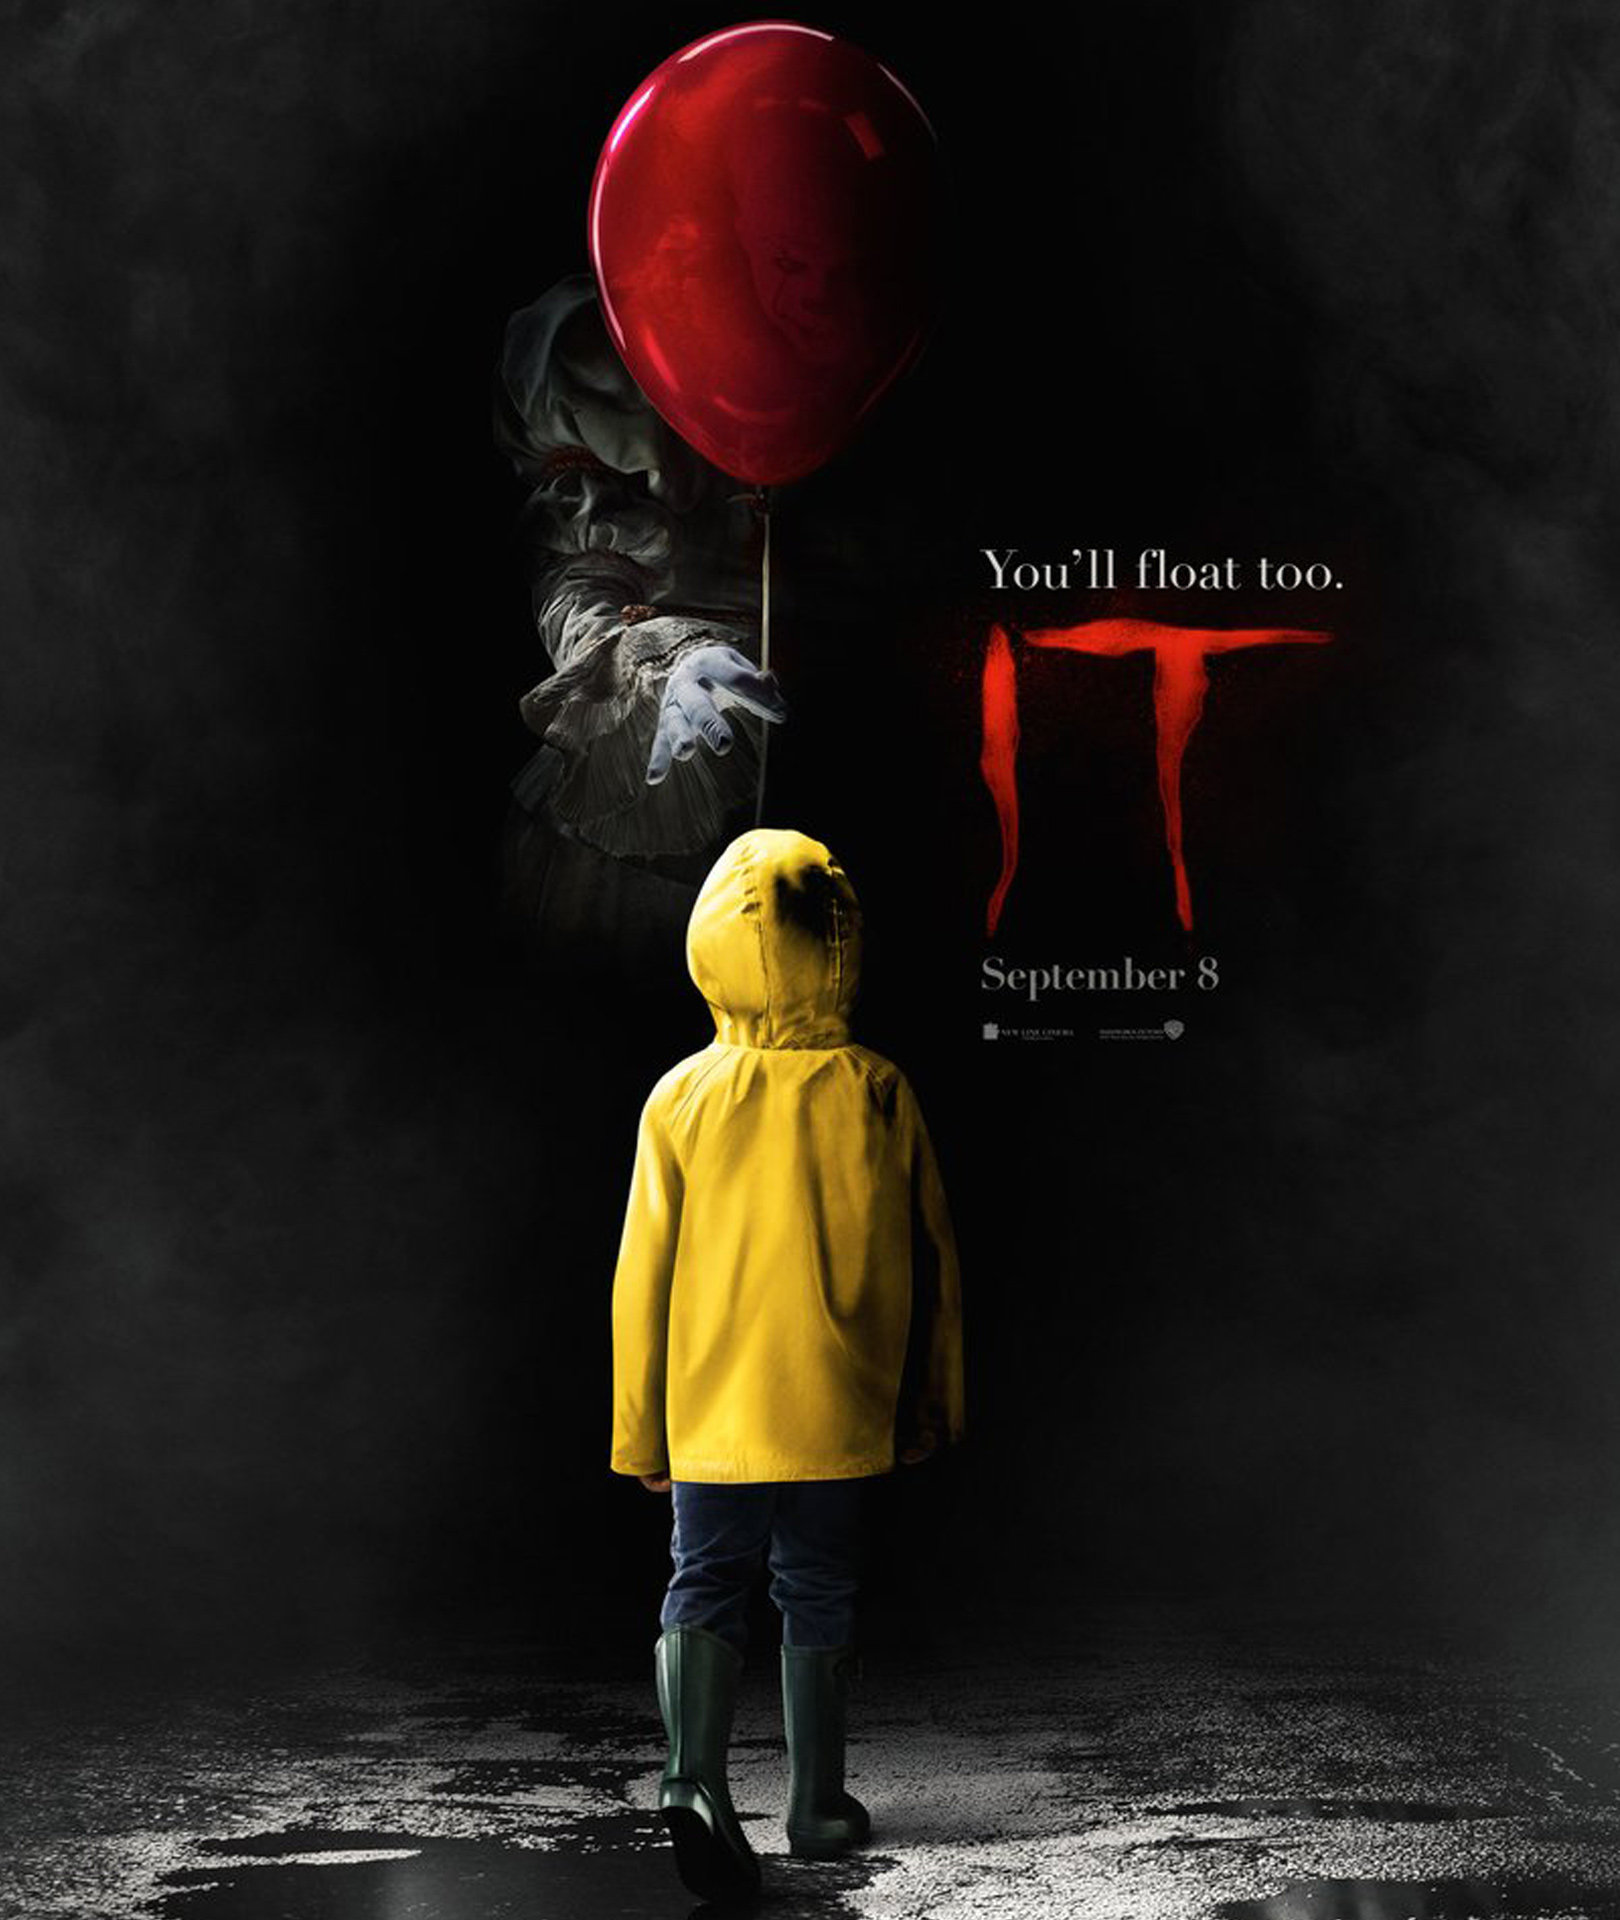 IT film review: Pennywise lives